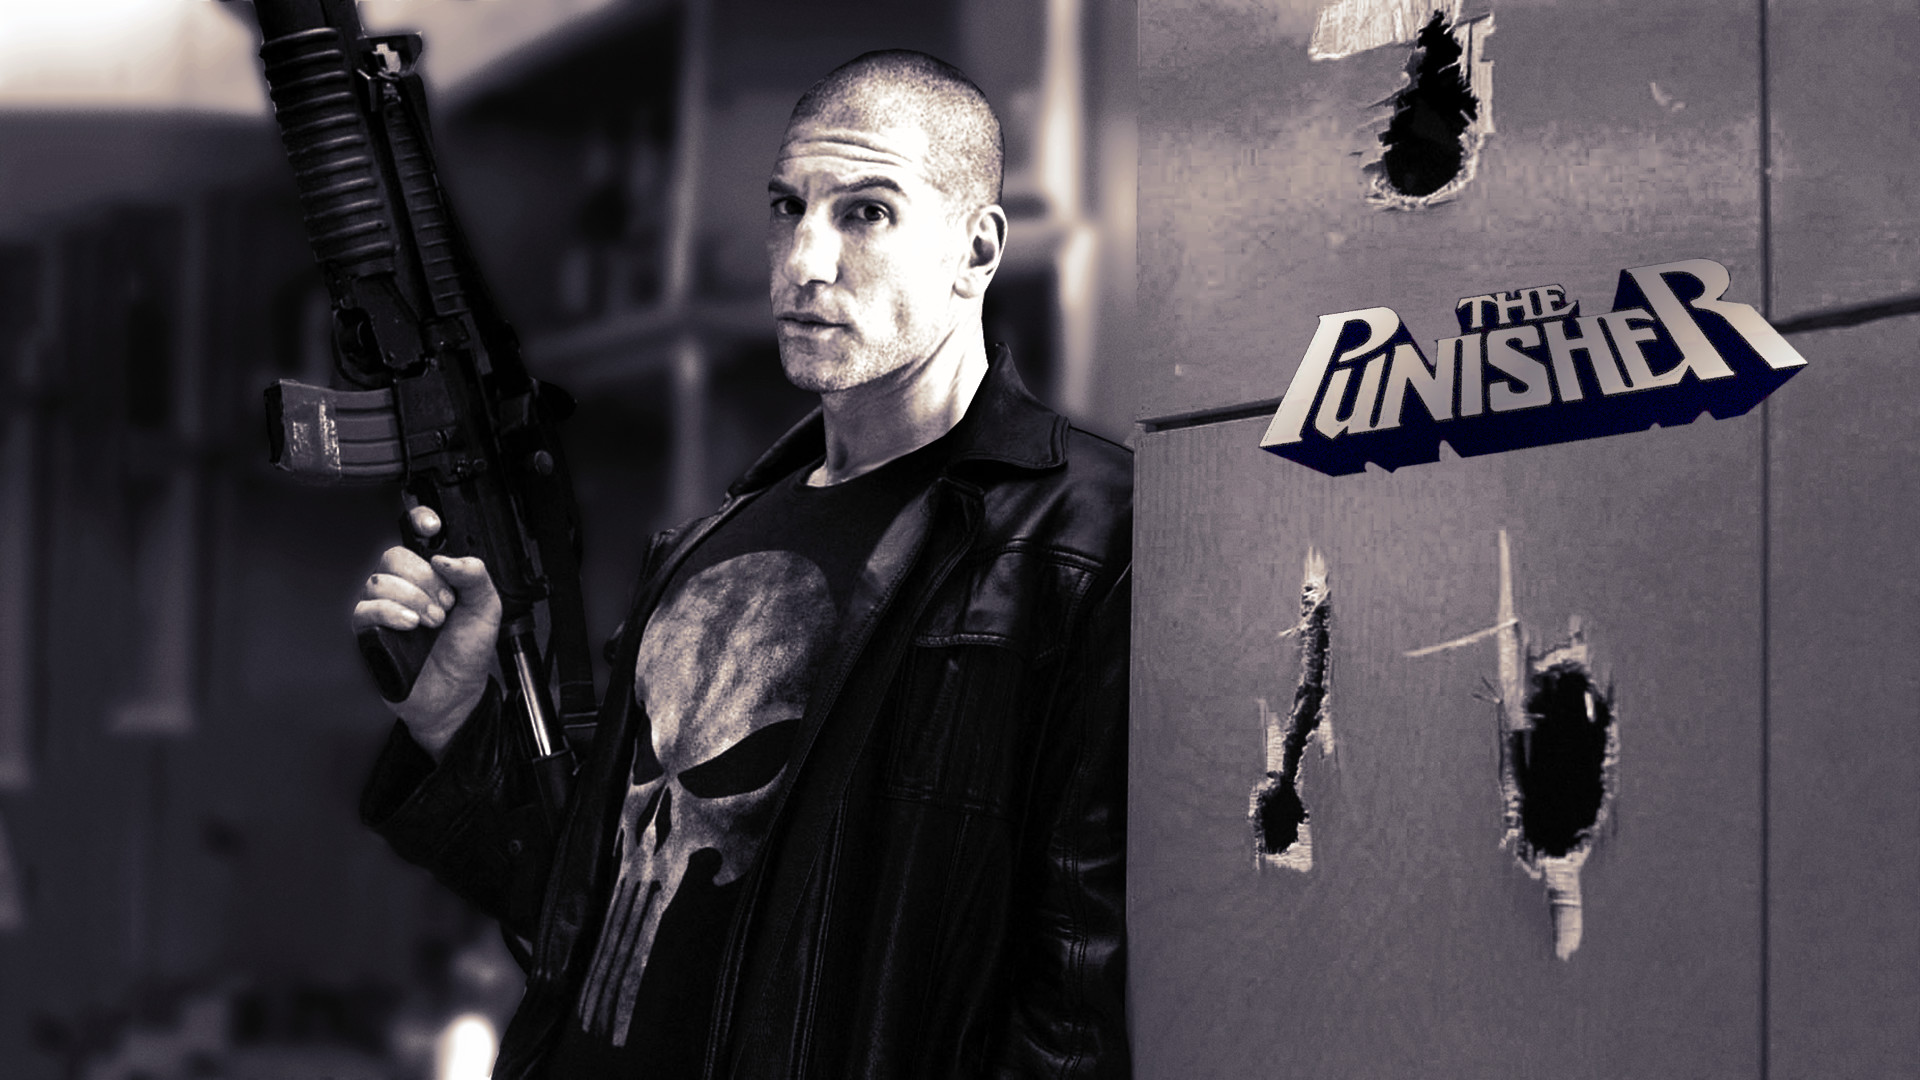 Punisher Wallpaper 1080p (65+ images)1920 x 1080